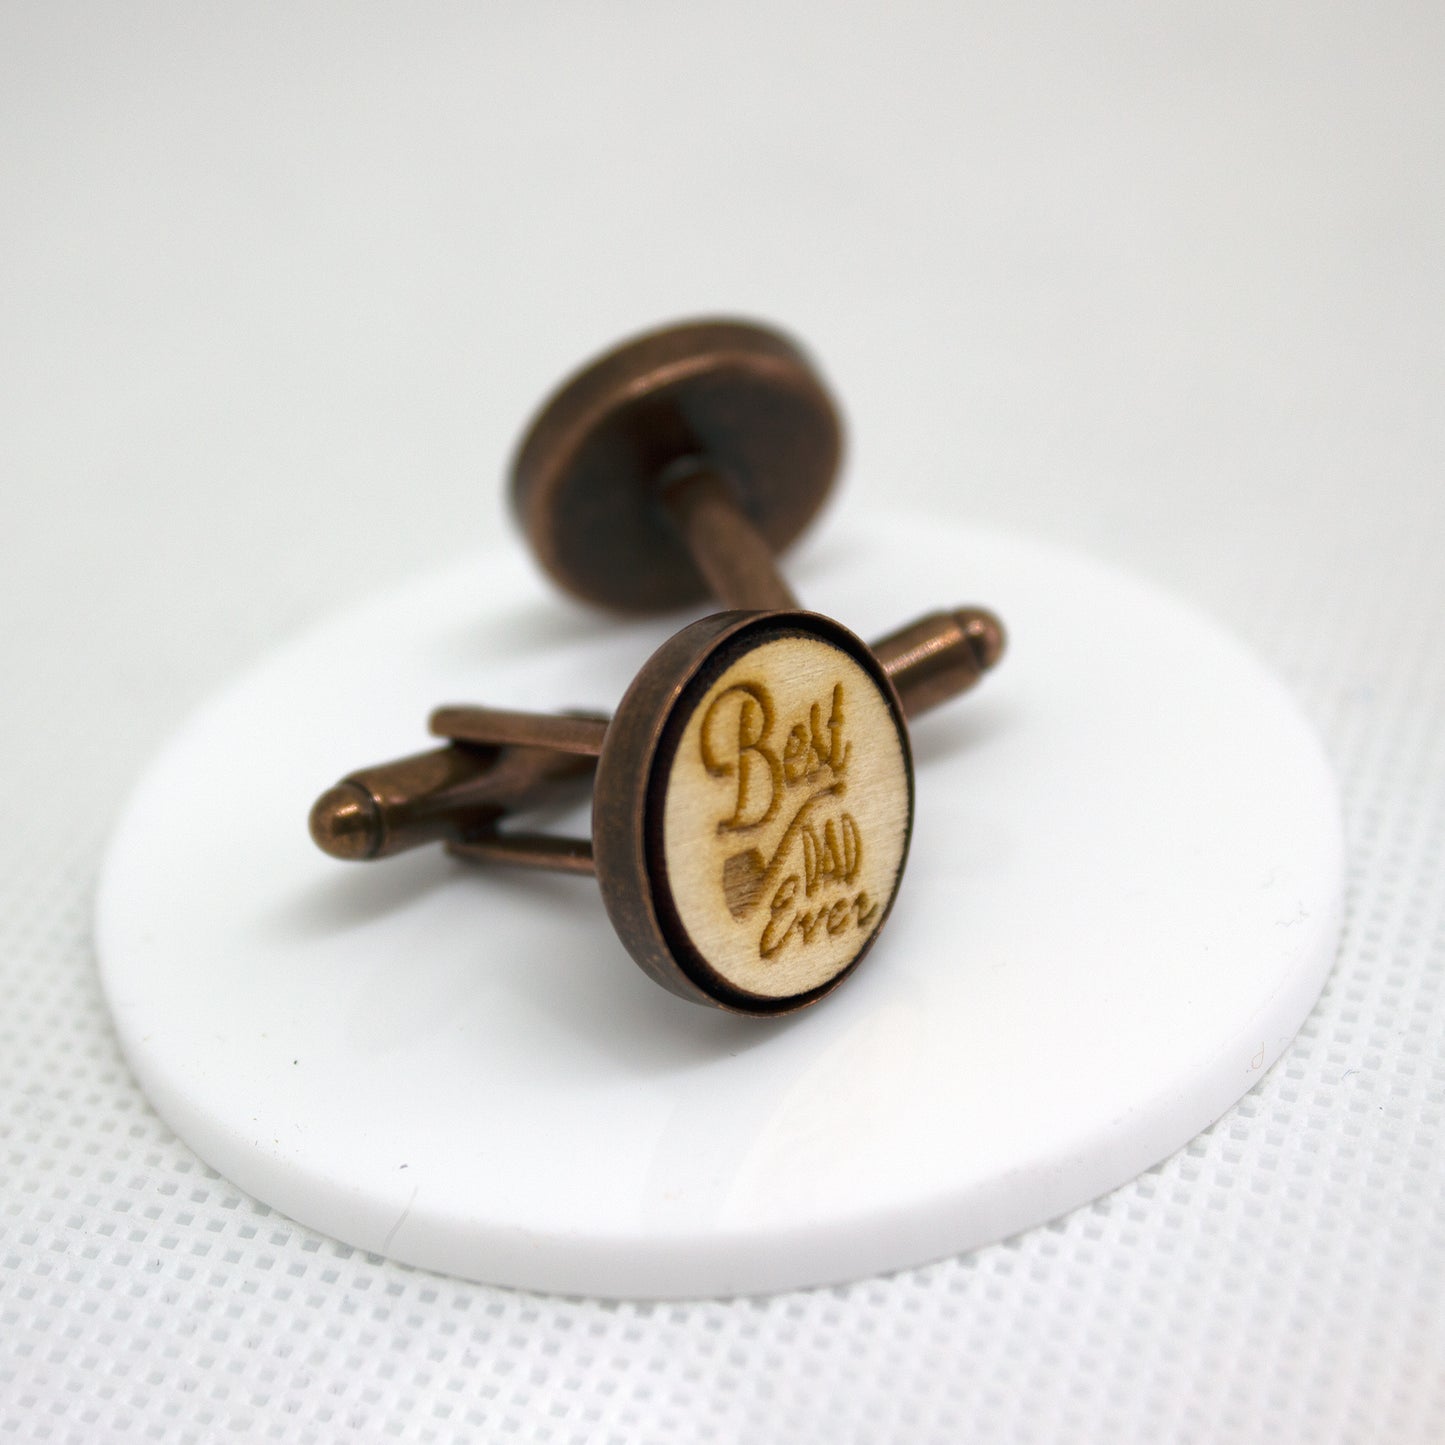 Best Dad Ever Cufflinks, Father's Day Gifts, Handmade Wooden Cufflinks, Gifts for Him